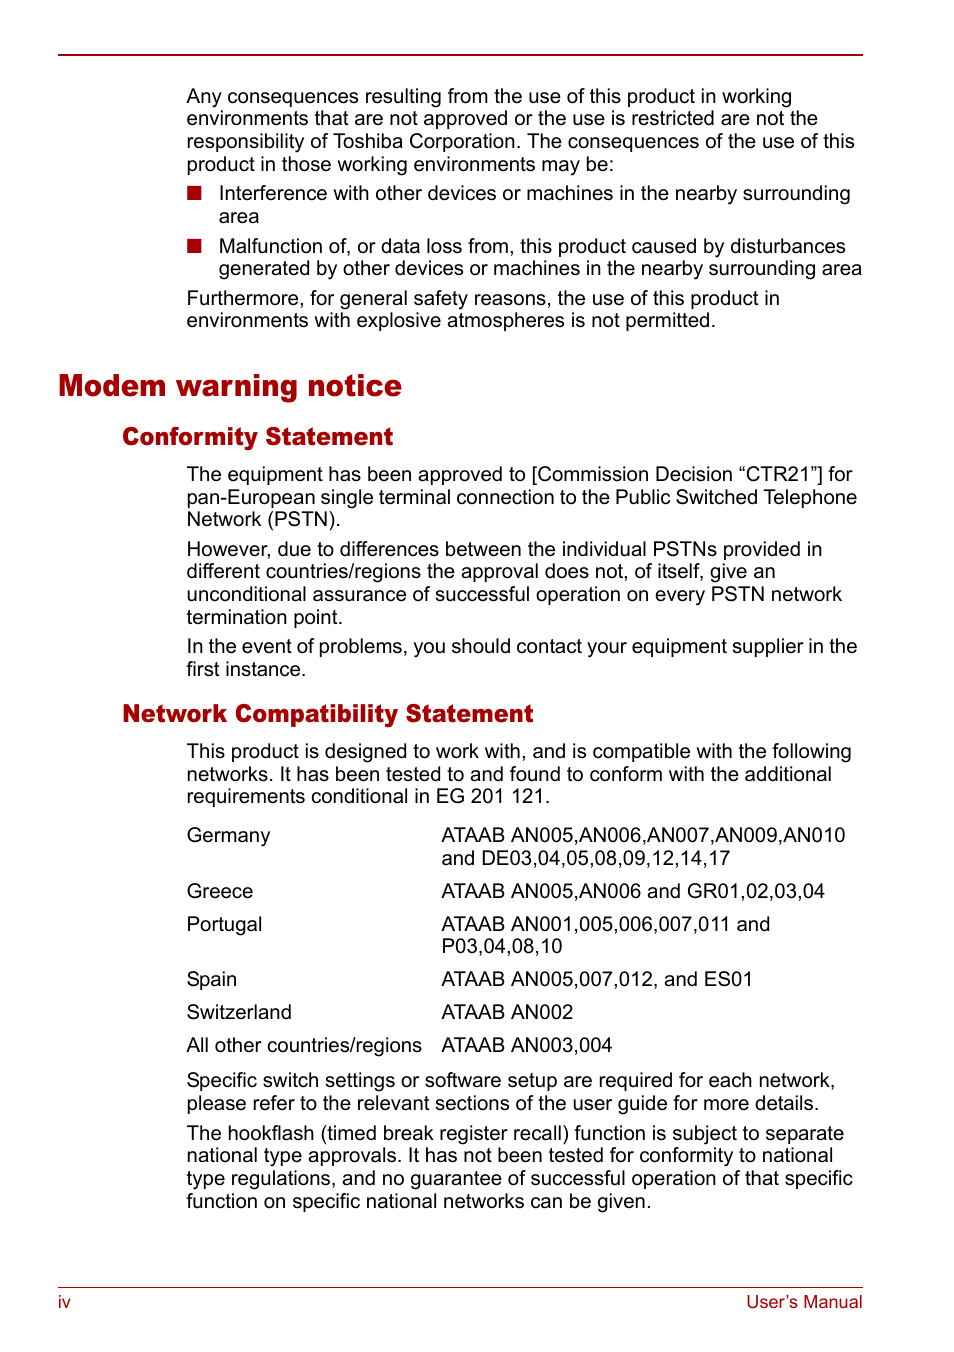 Modem warning notice, Conformity statement, Network compatibility statement | Toshiba Tecra M7 User Manual | Page 4 / 244